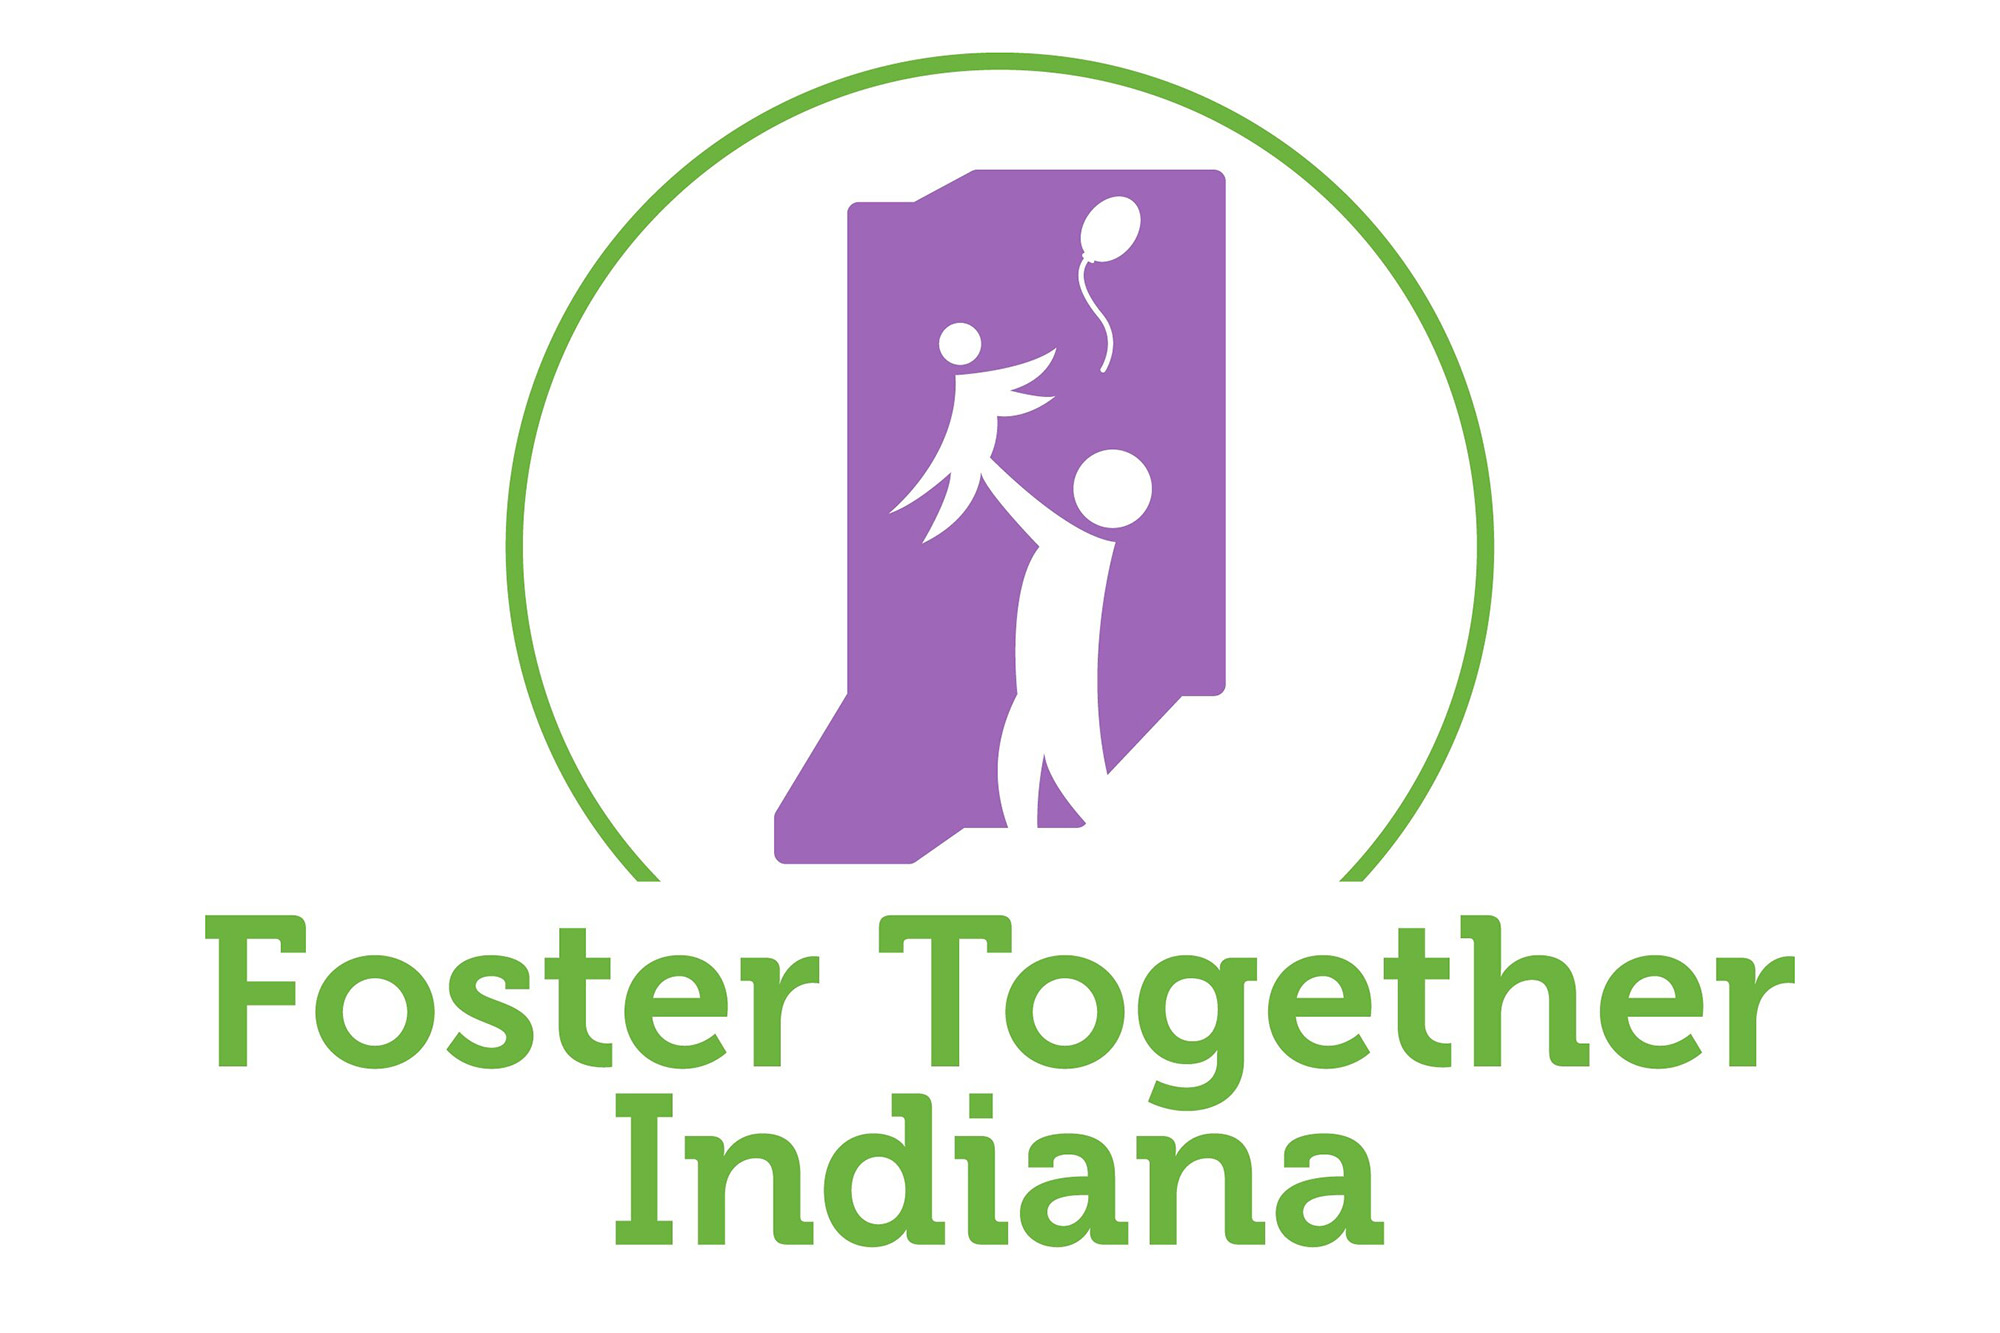 New Coalition Plans To Expand, Improve Foster Care Services In Indiana